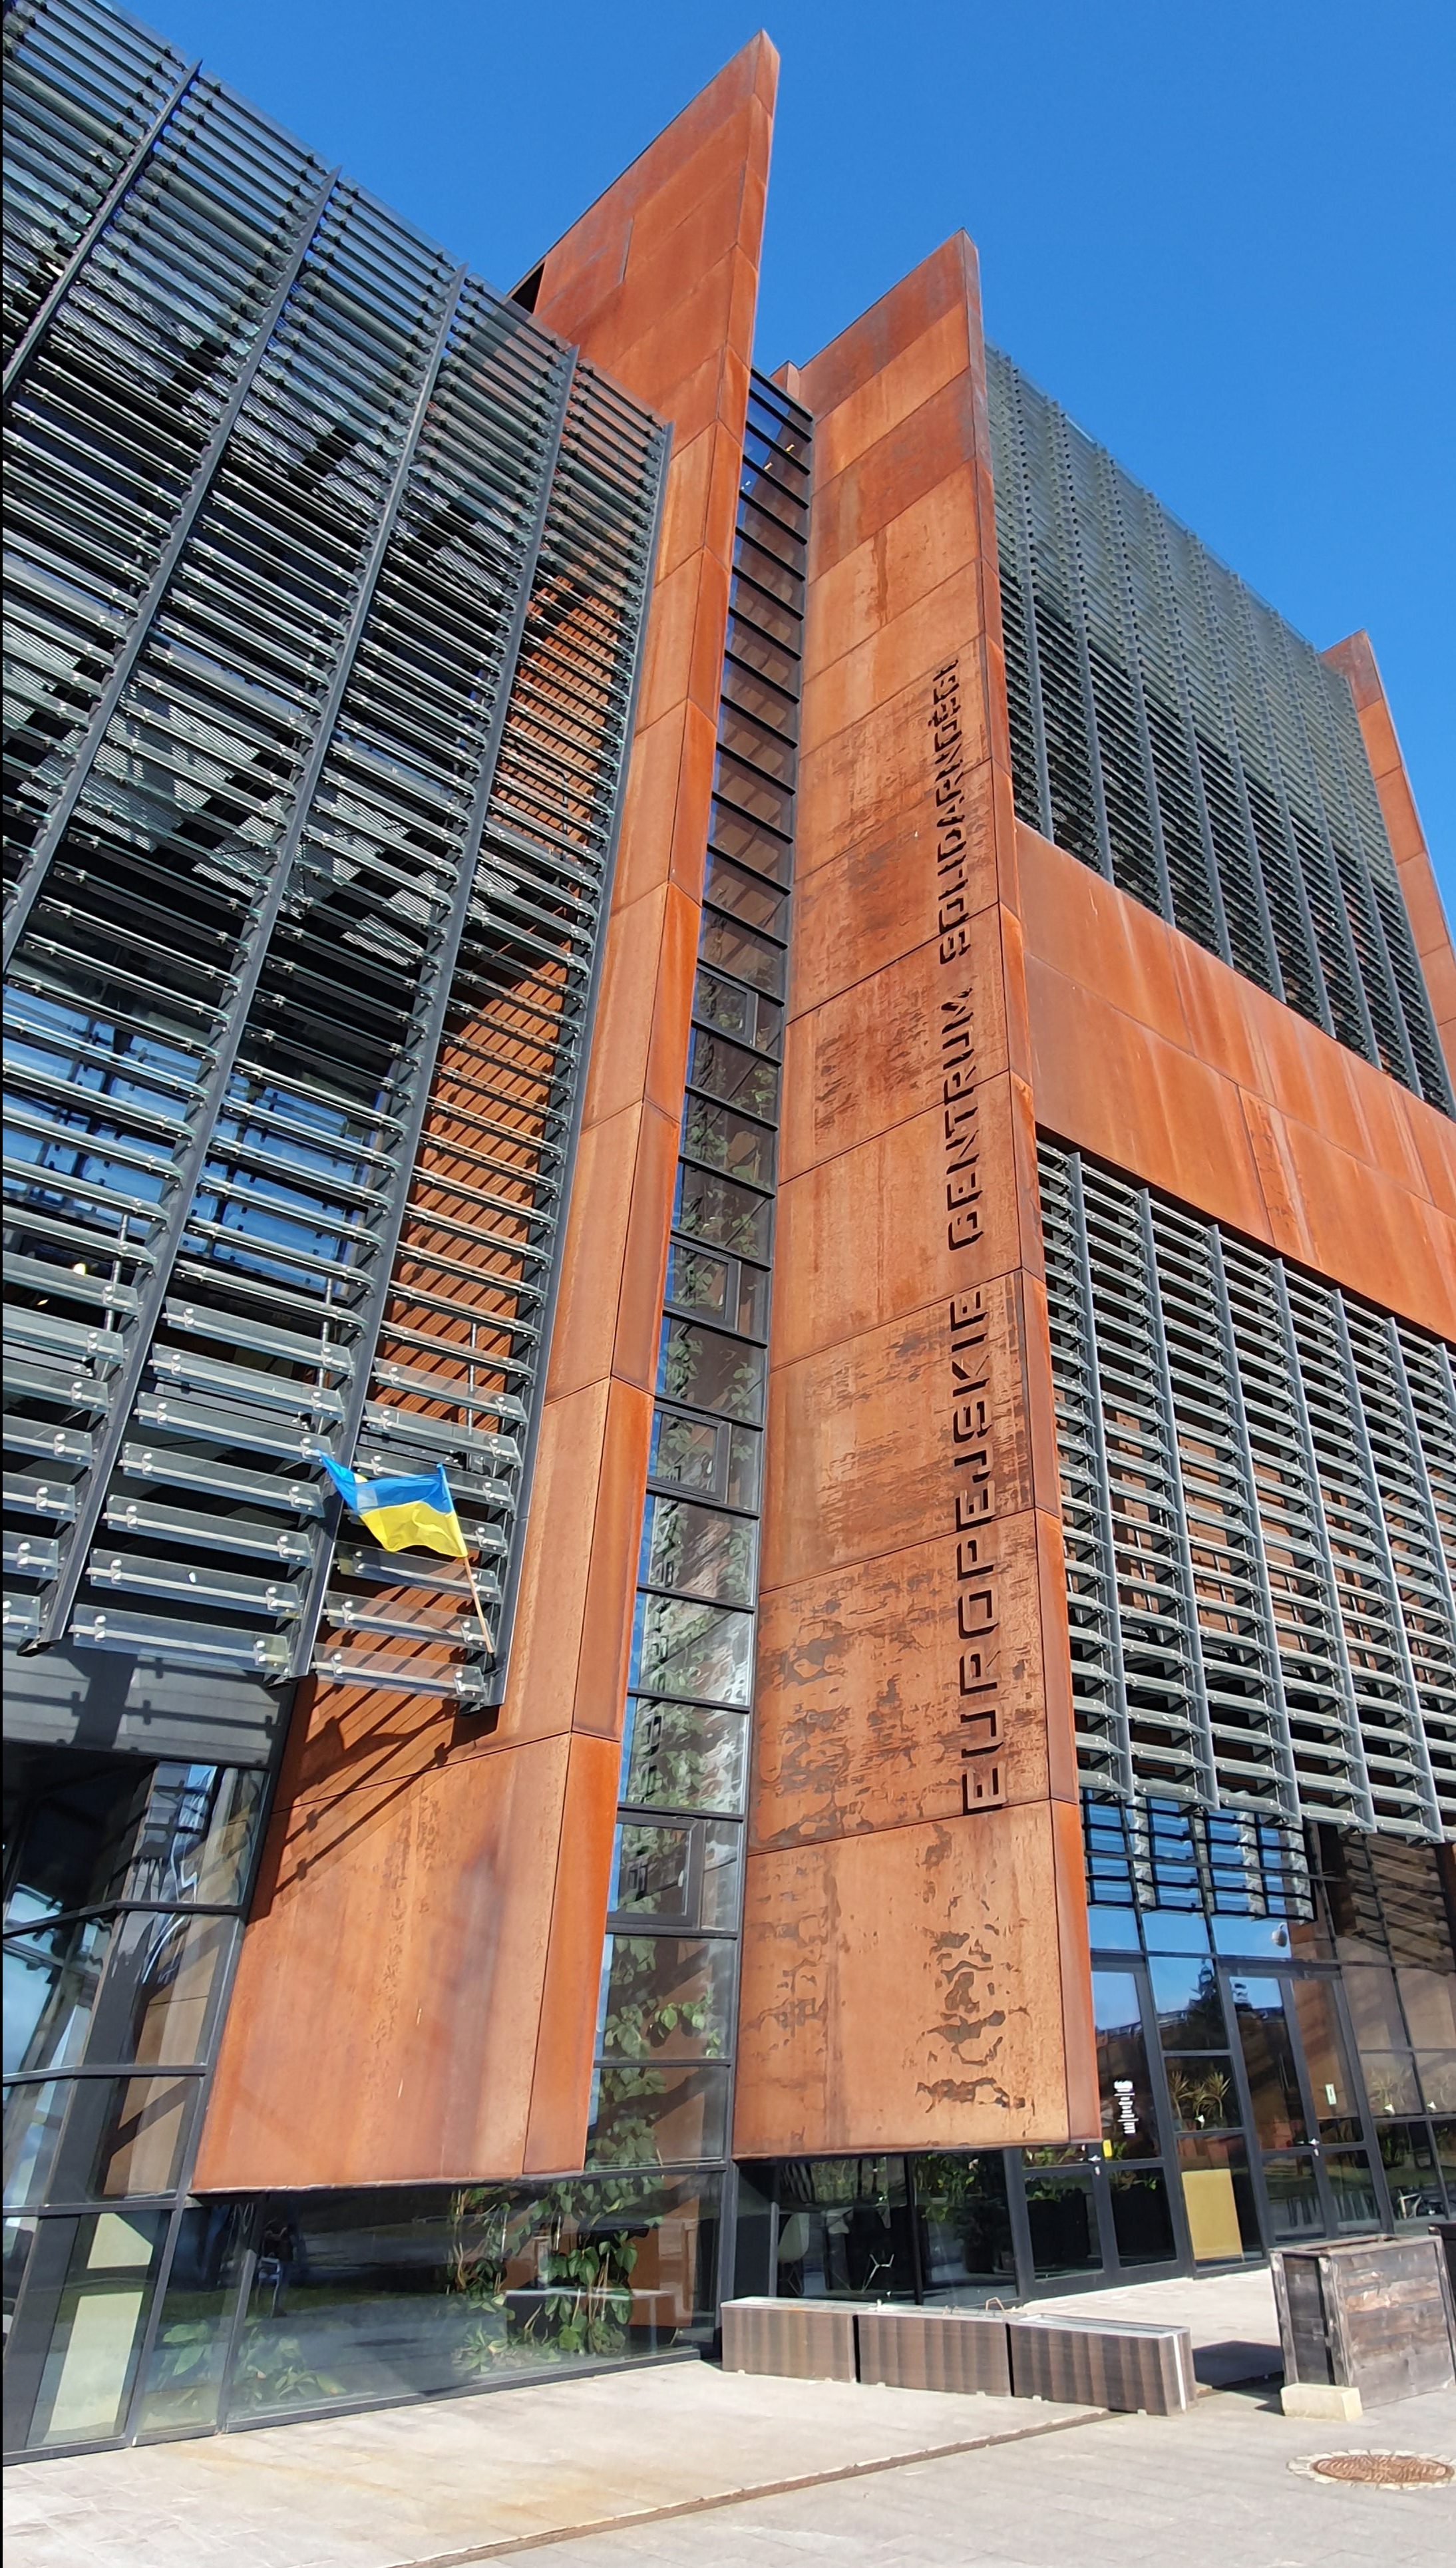 The European Solidarity Centre in Gdansk has taken up the Ukrainian cause. (Photo: Greg Mills)